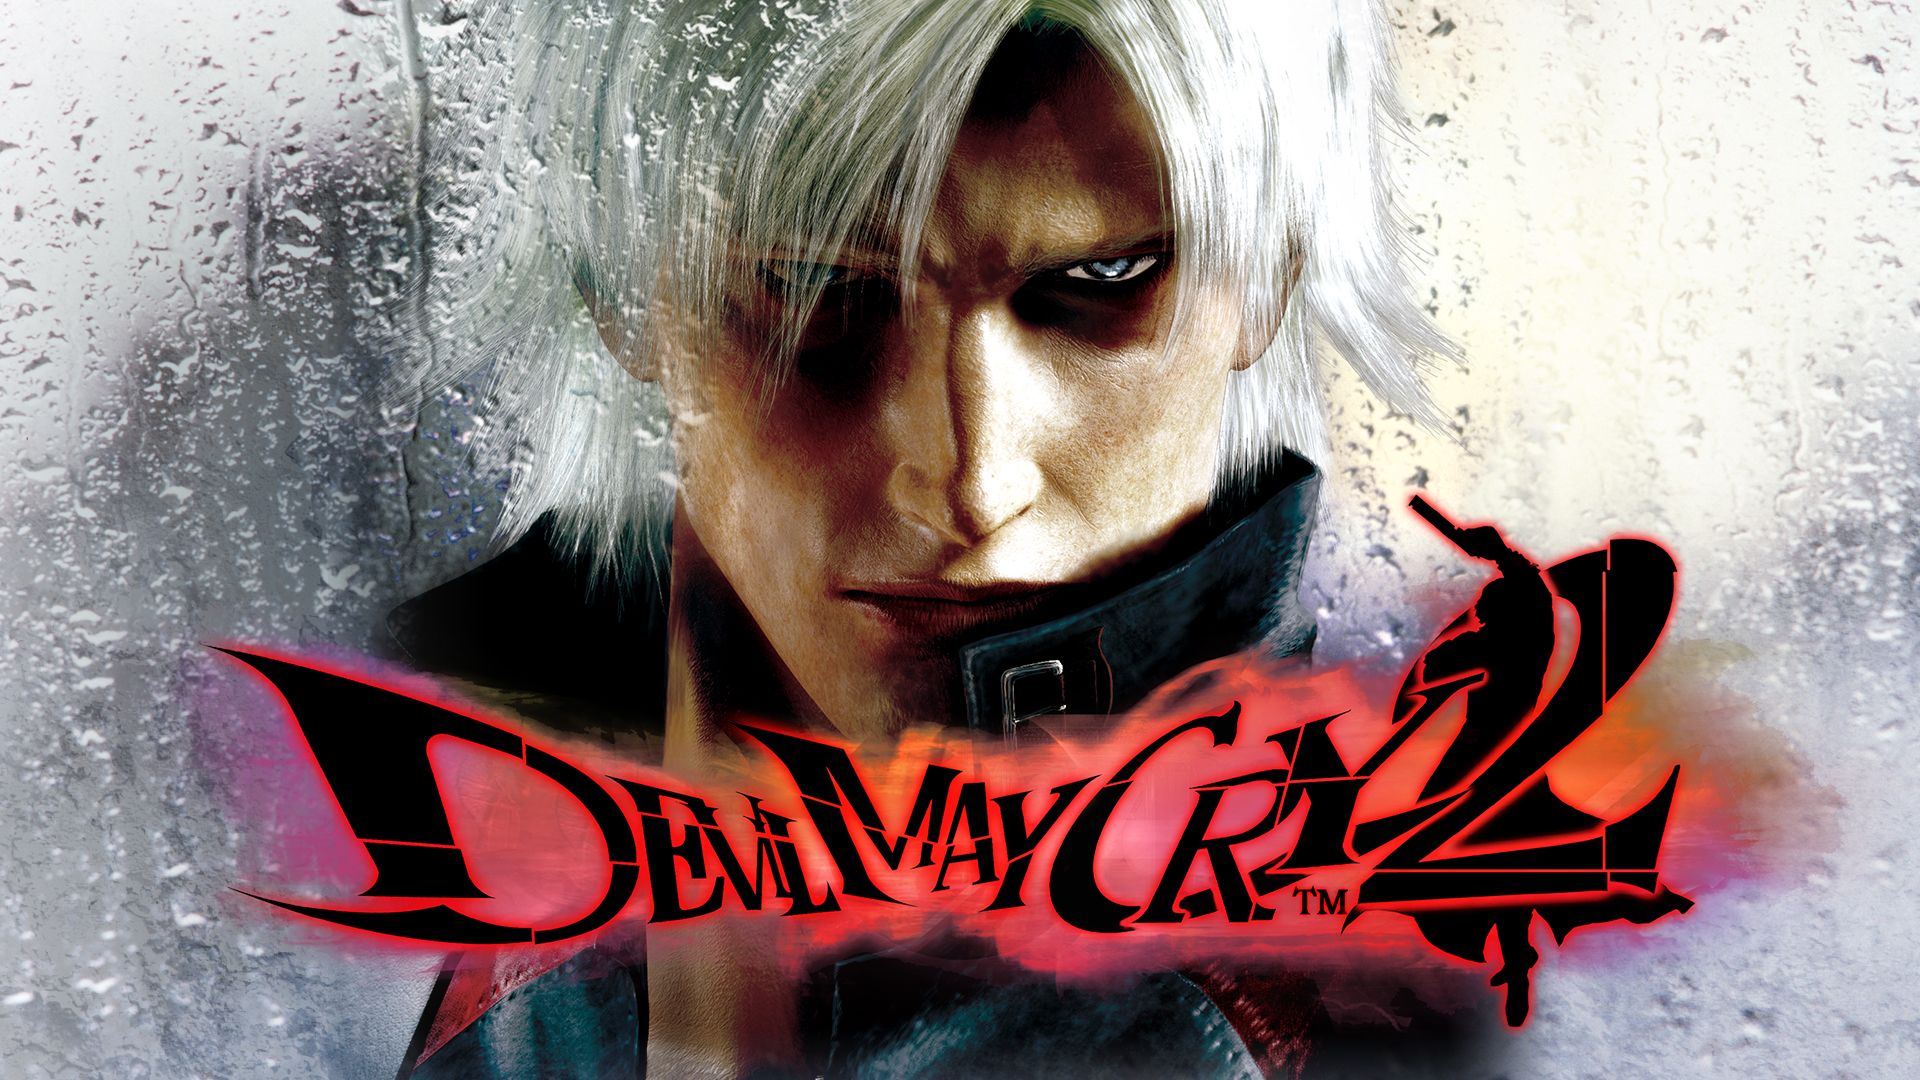 Devil may cry wallpapers